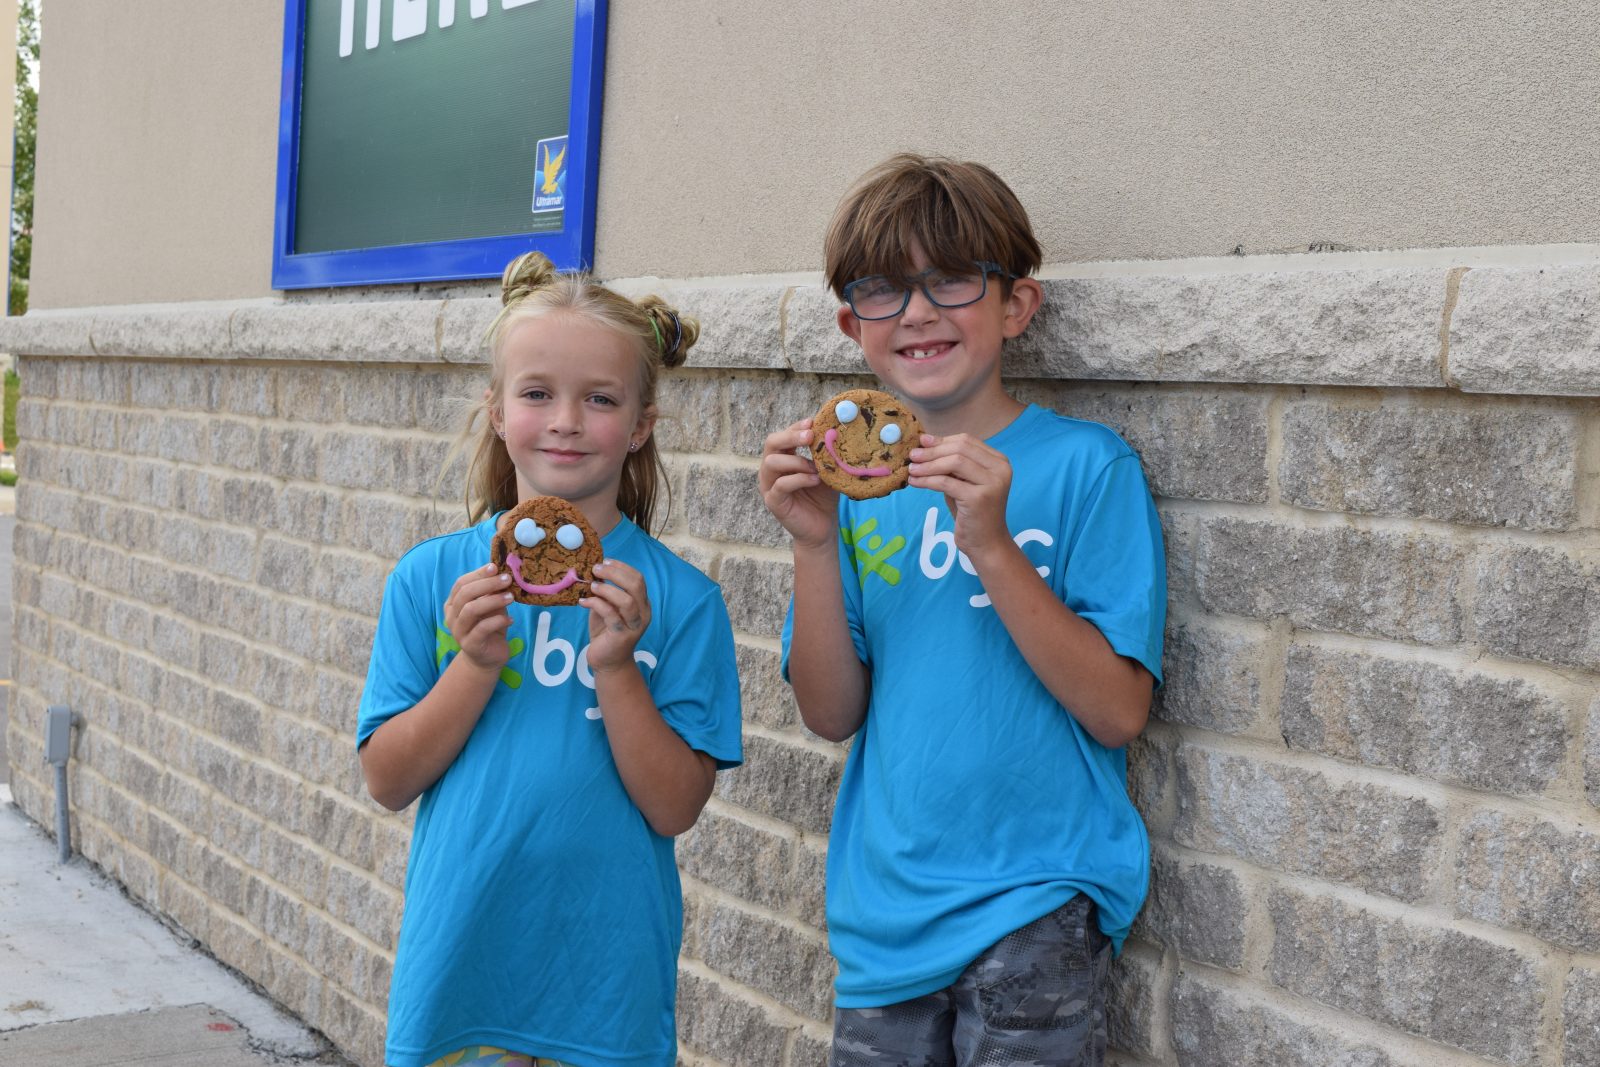 Smile Cookies support Boys and Girls Club